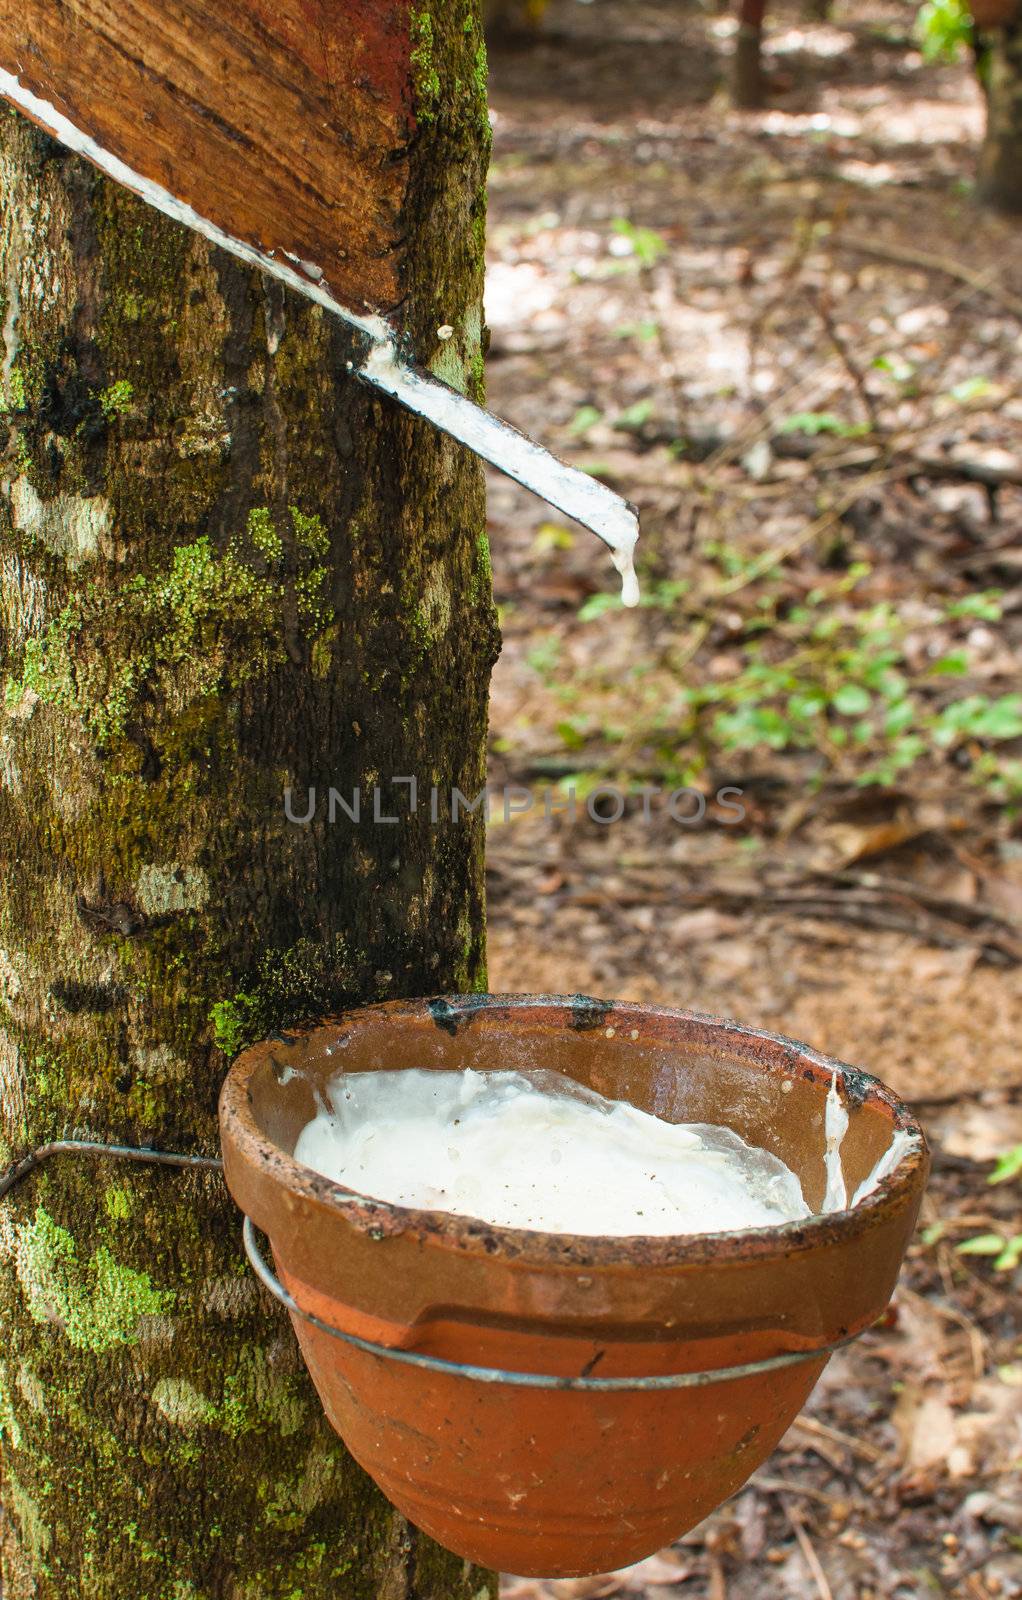 Tapping latex from a rubber tree